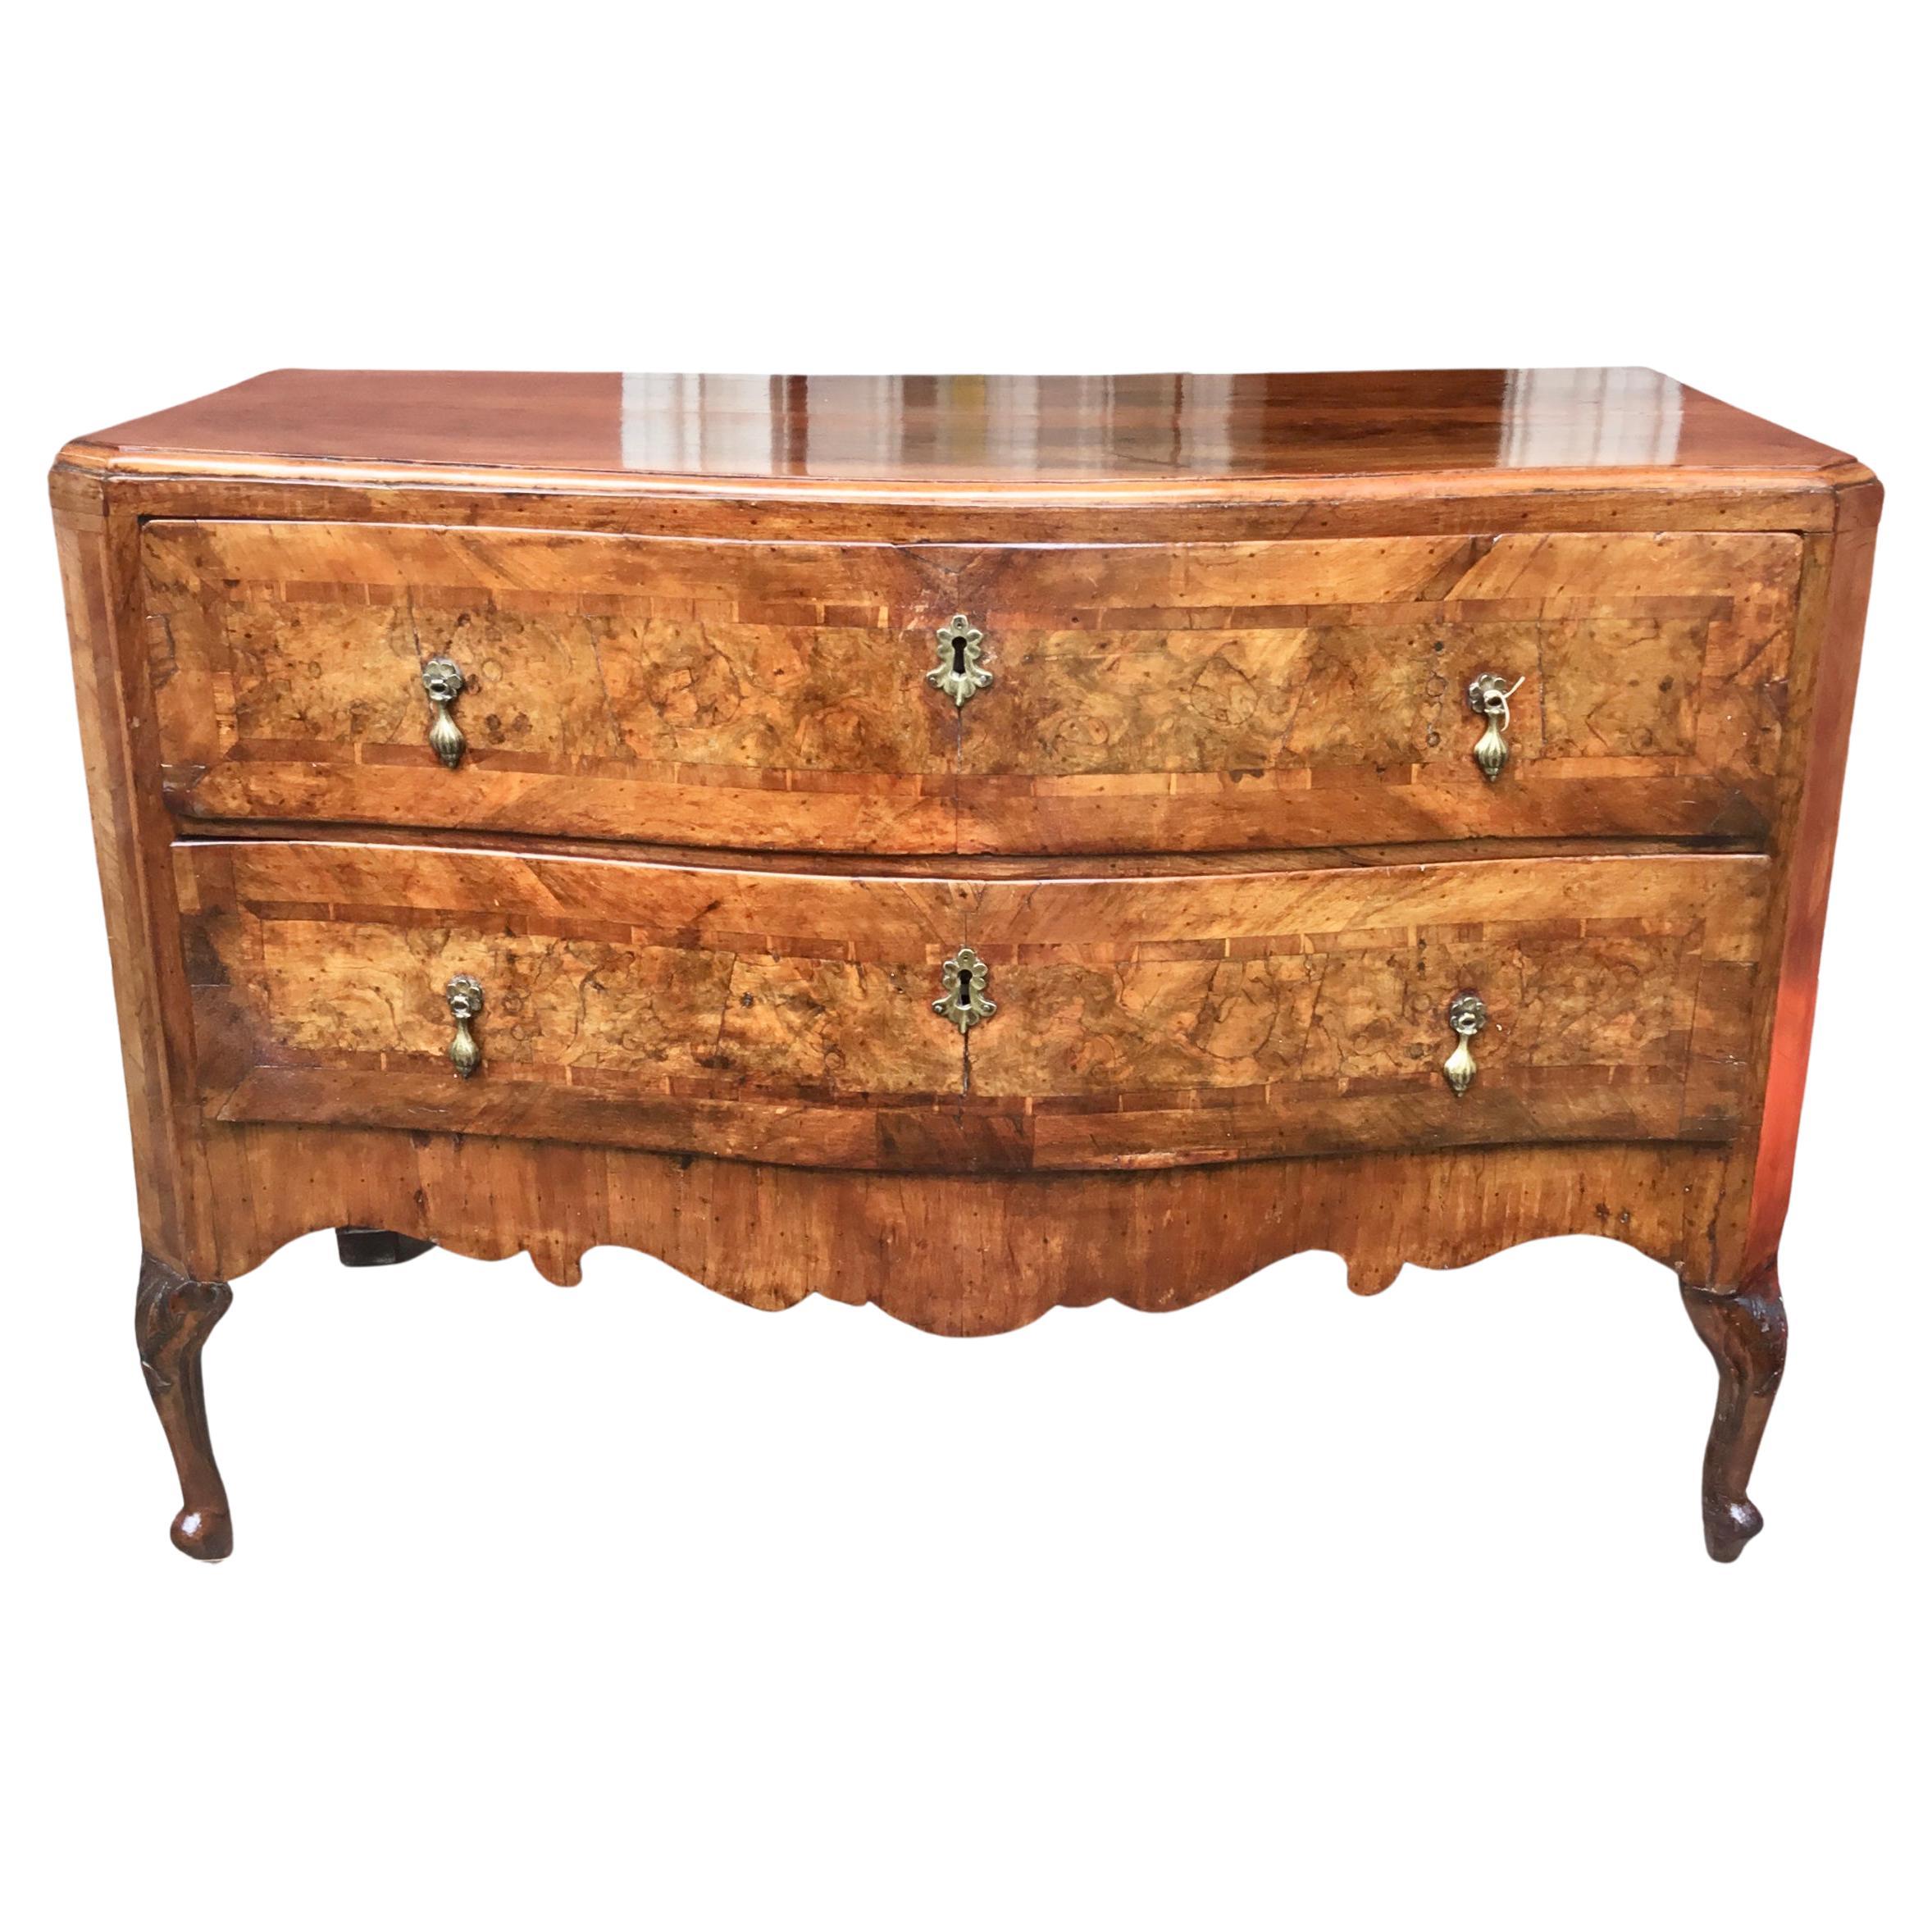 Italian Serpentine Neoclassical Walnut Commode with Scalloped Skirt  For Sale